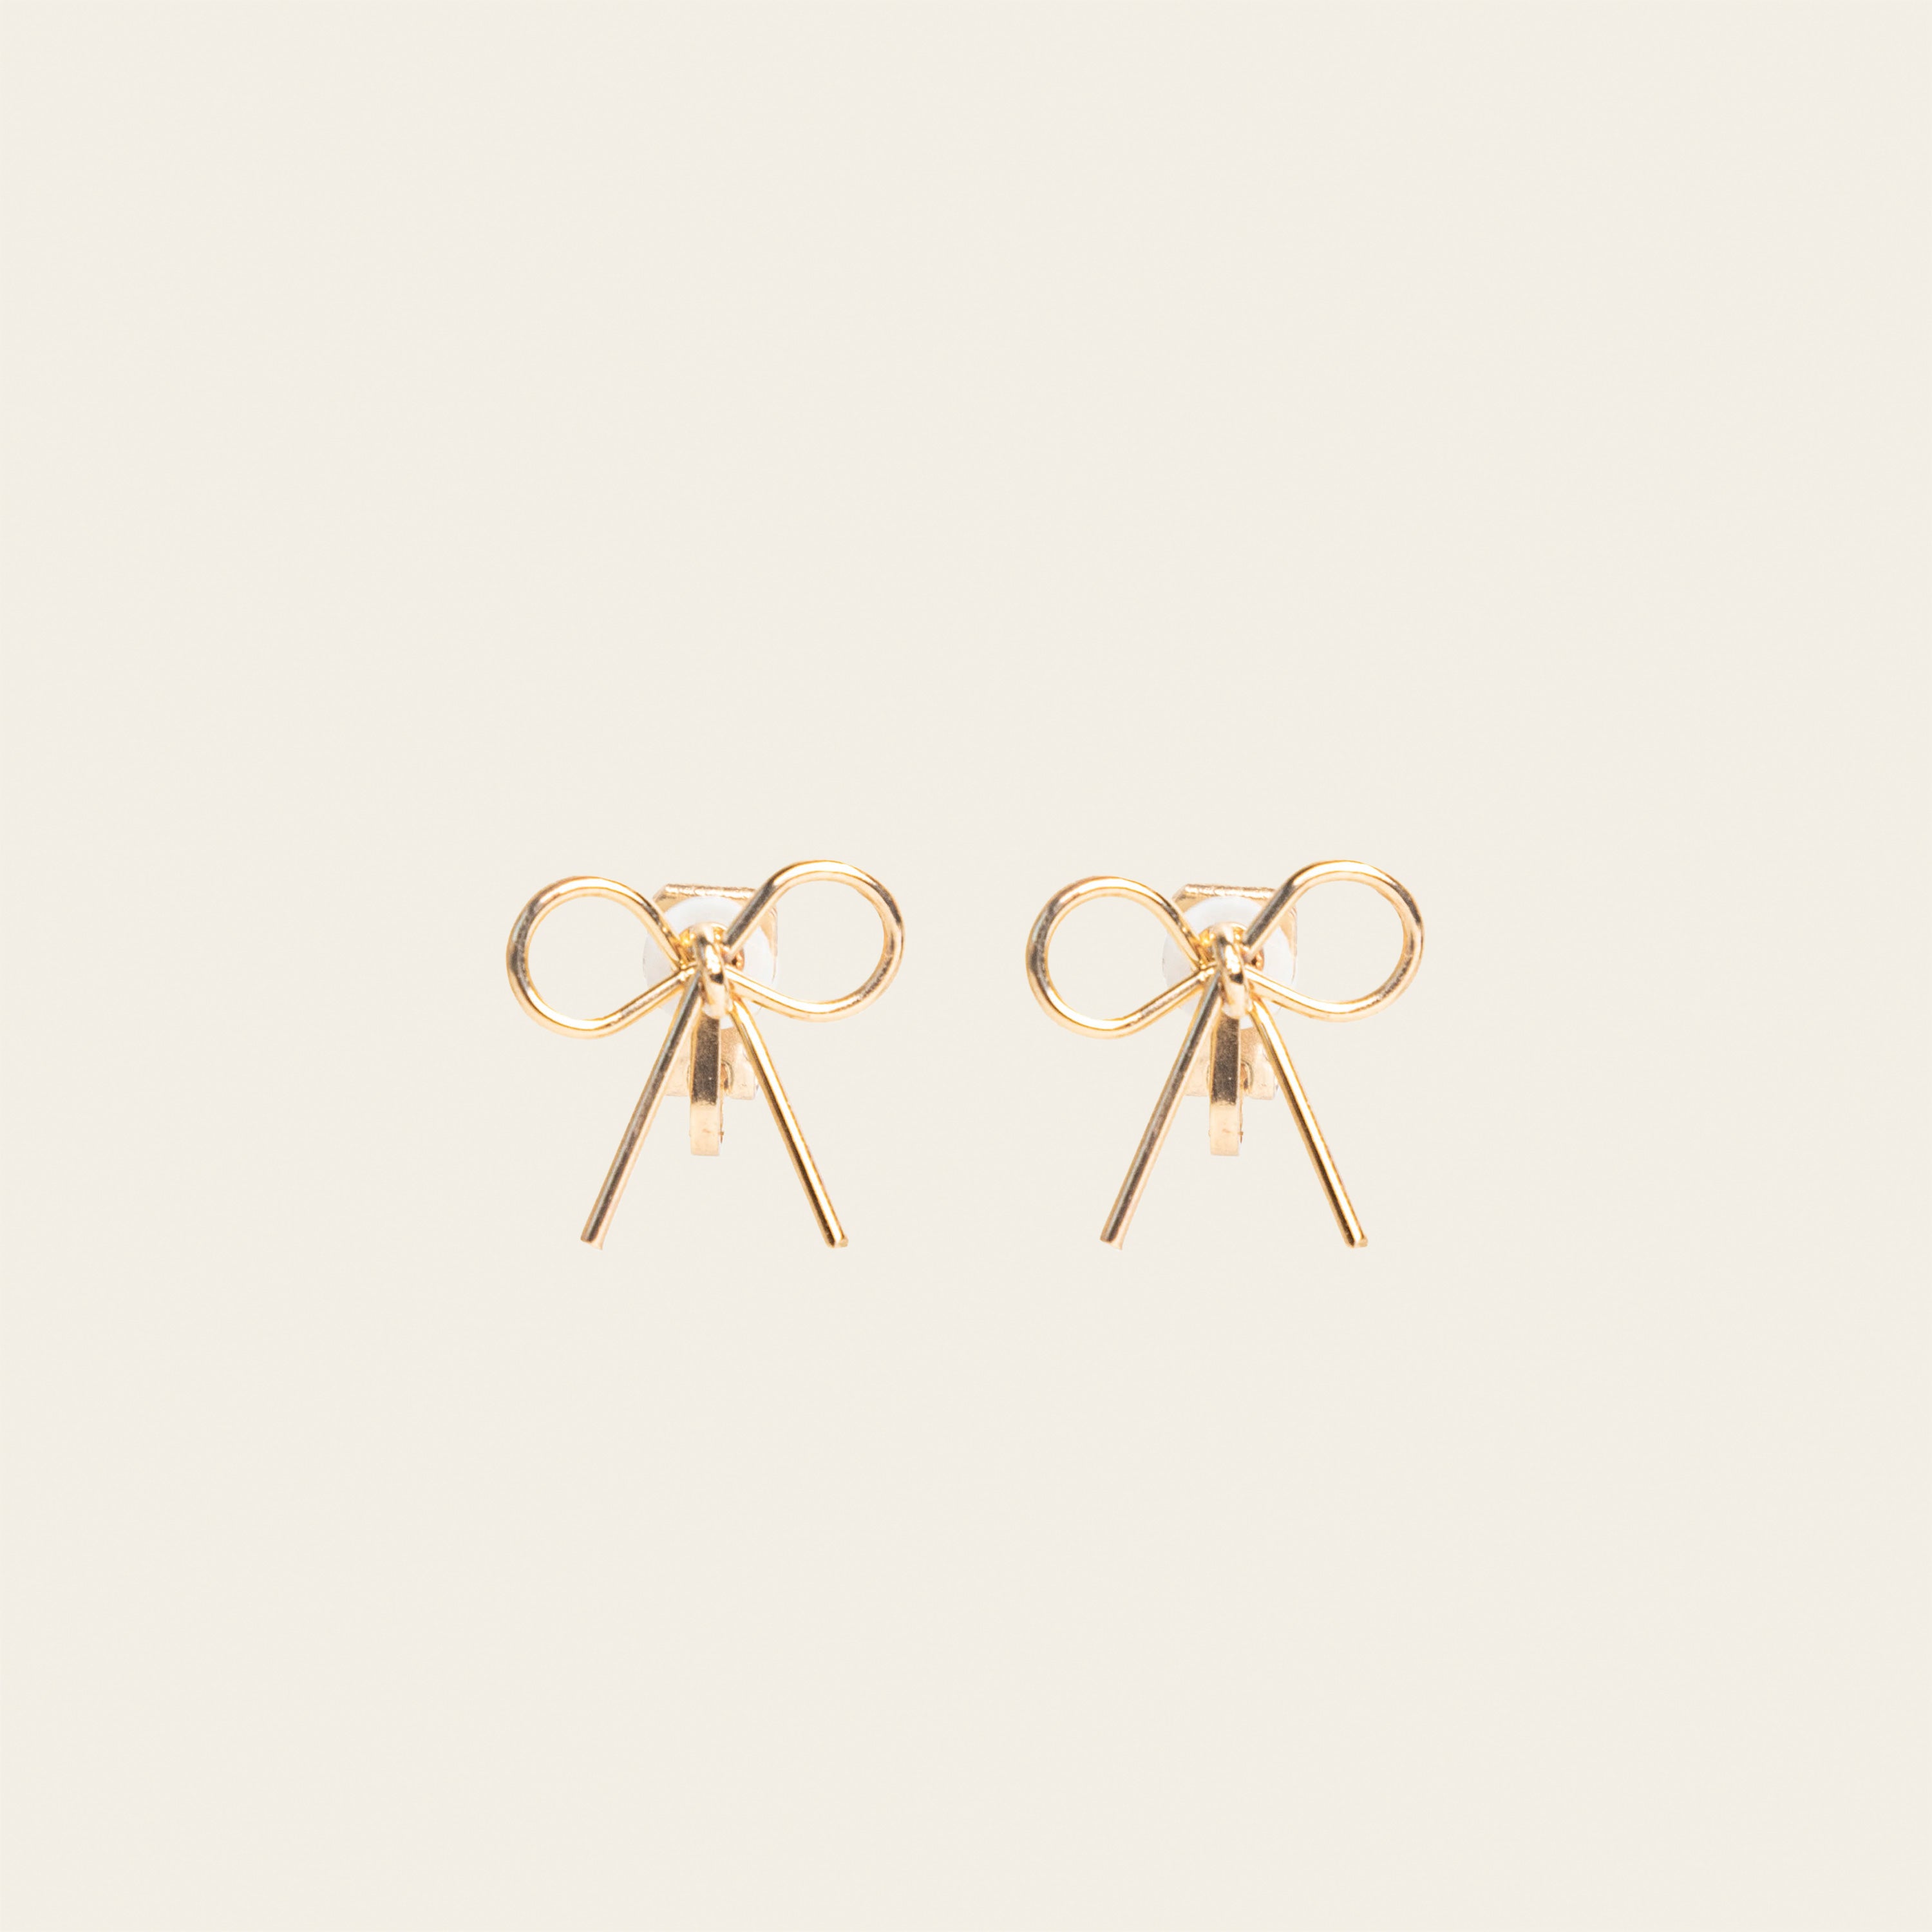 Image of the Celia Clip On Earrings. Designed with a 24-hour hold and adjustable fit, these earrings are perfect for sensitive or stretched ears. Elevate your style with elegance and comfort.